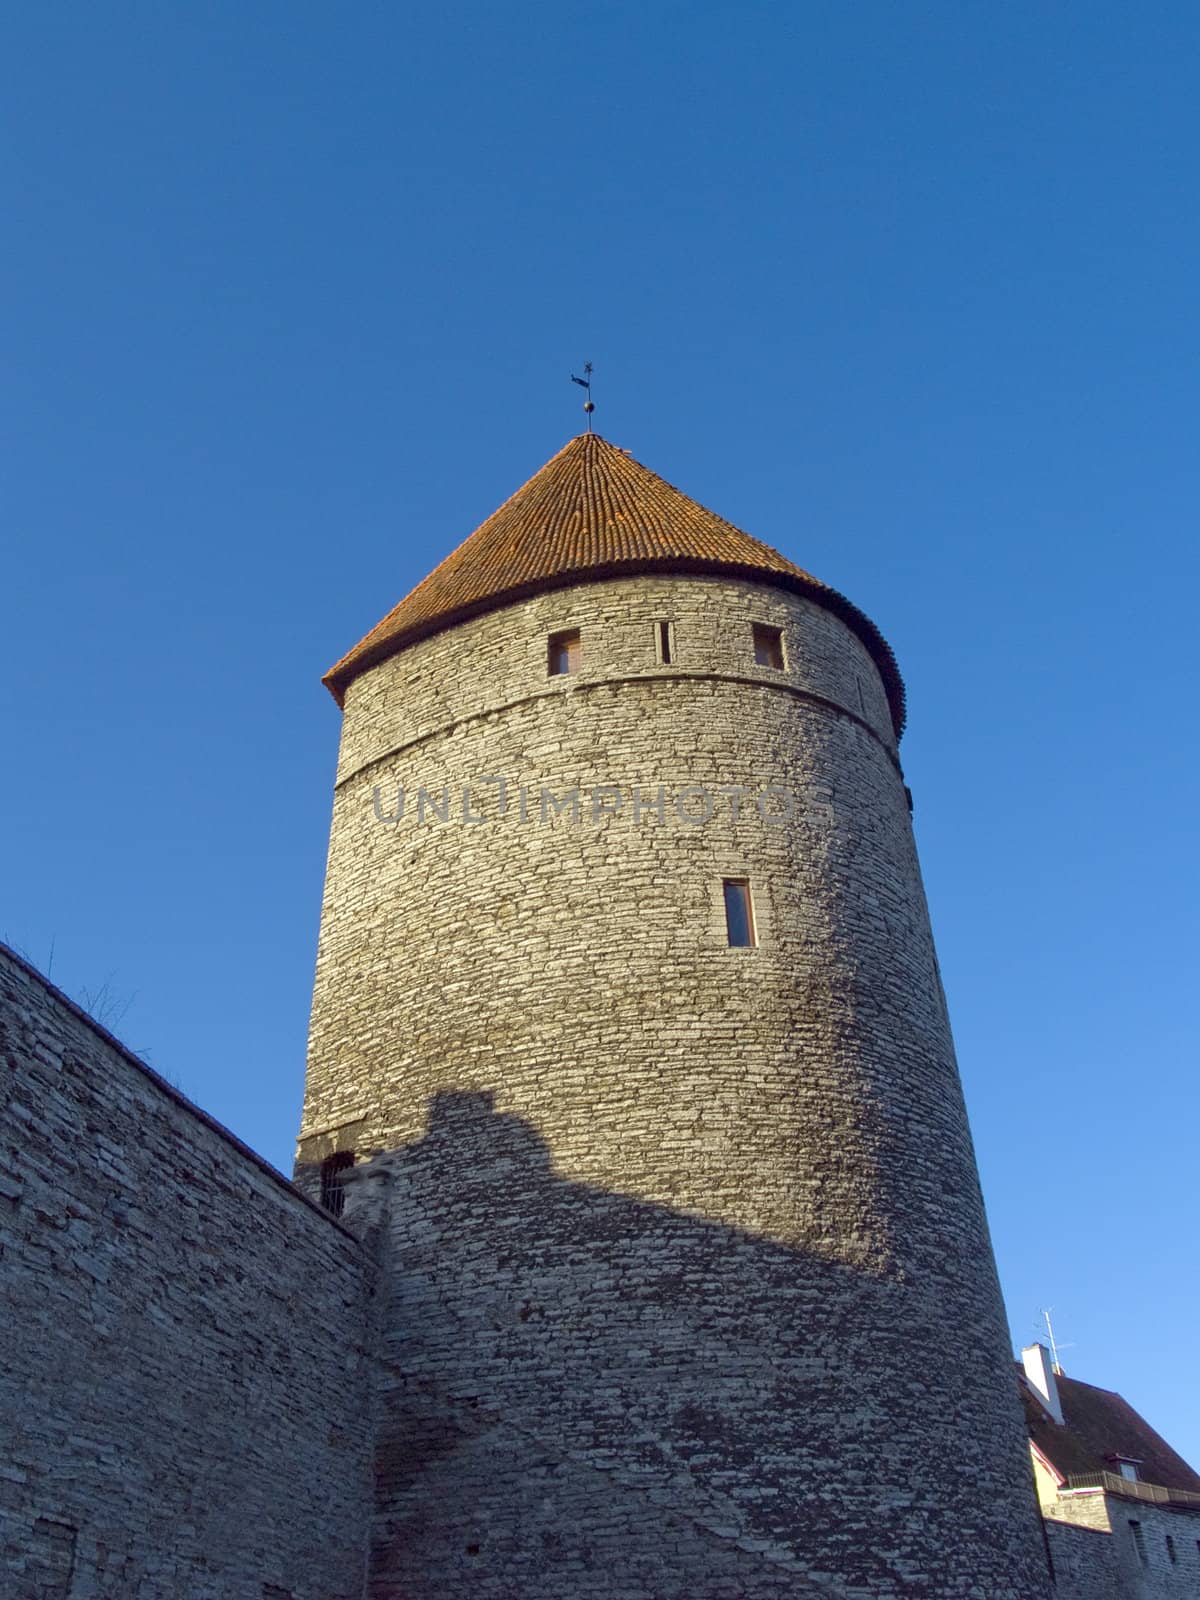 Medieval Fortification  and towers in capital of Estonia Tallinn